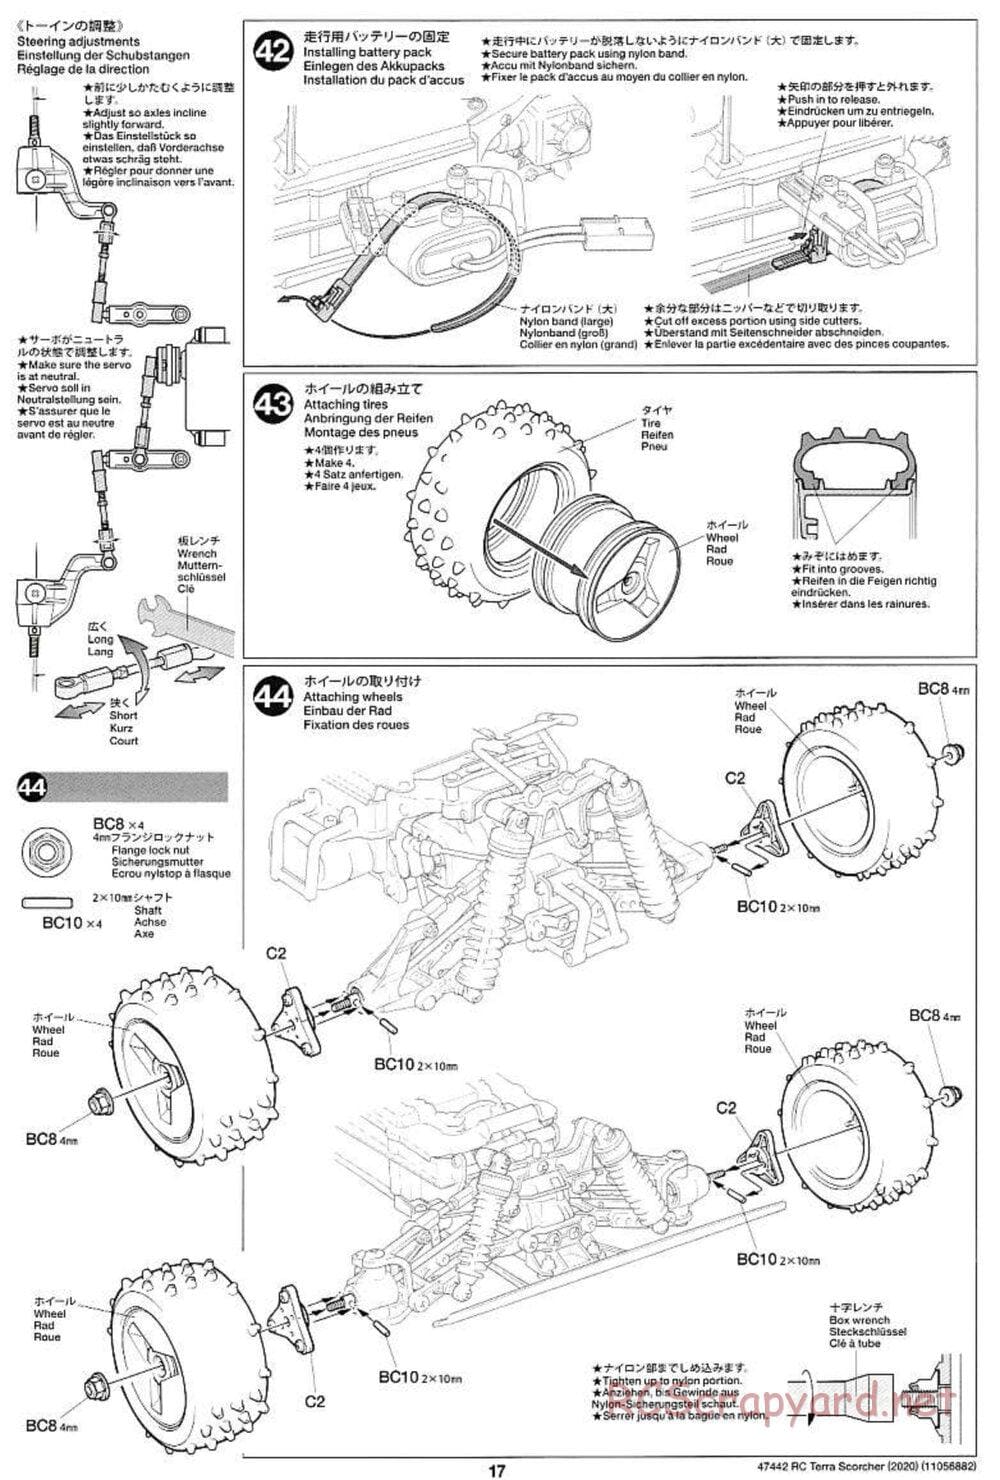 Tamiya - Terra Scorcher 2020 Chassis - Manual - Page 17